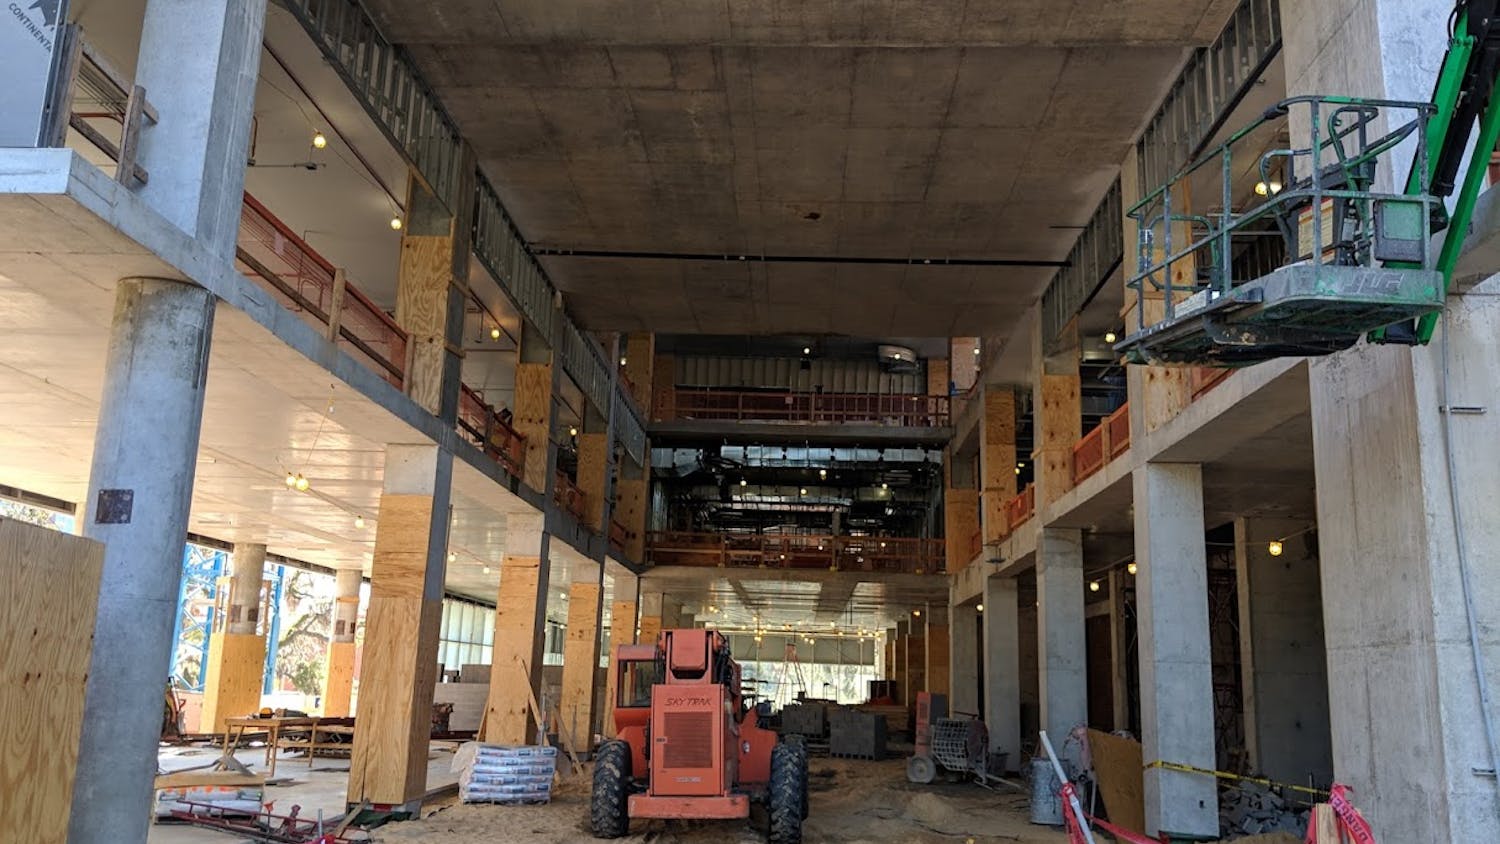 The construction of the Herbert Wertheim Laboratory for Engineering Excellence is projected to cost more than $70 million, which is $20 million more than its projected cost. The building is located between the Reitz Union and Weimer Hall, and it will house study rooms and labs.  